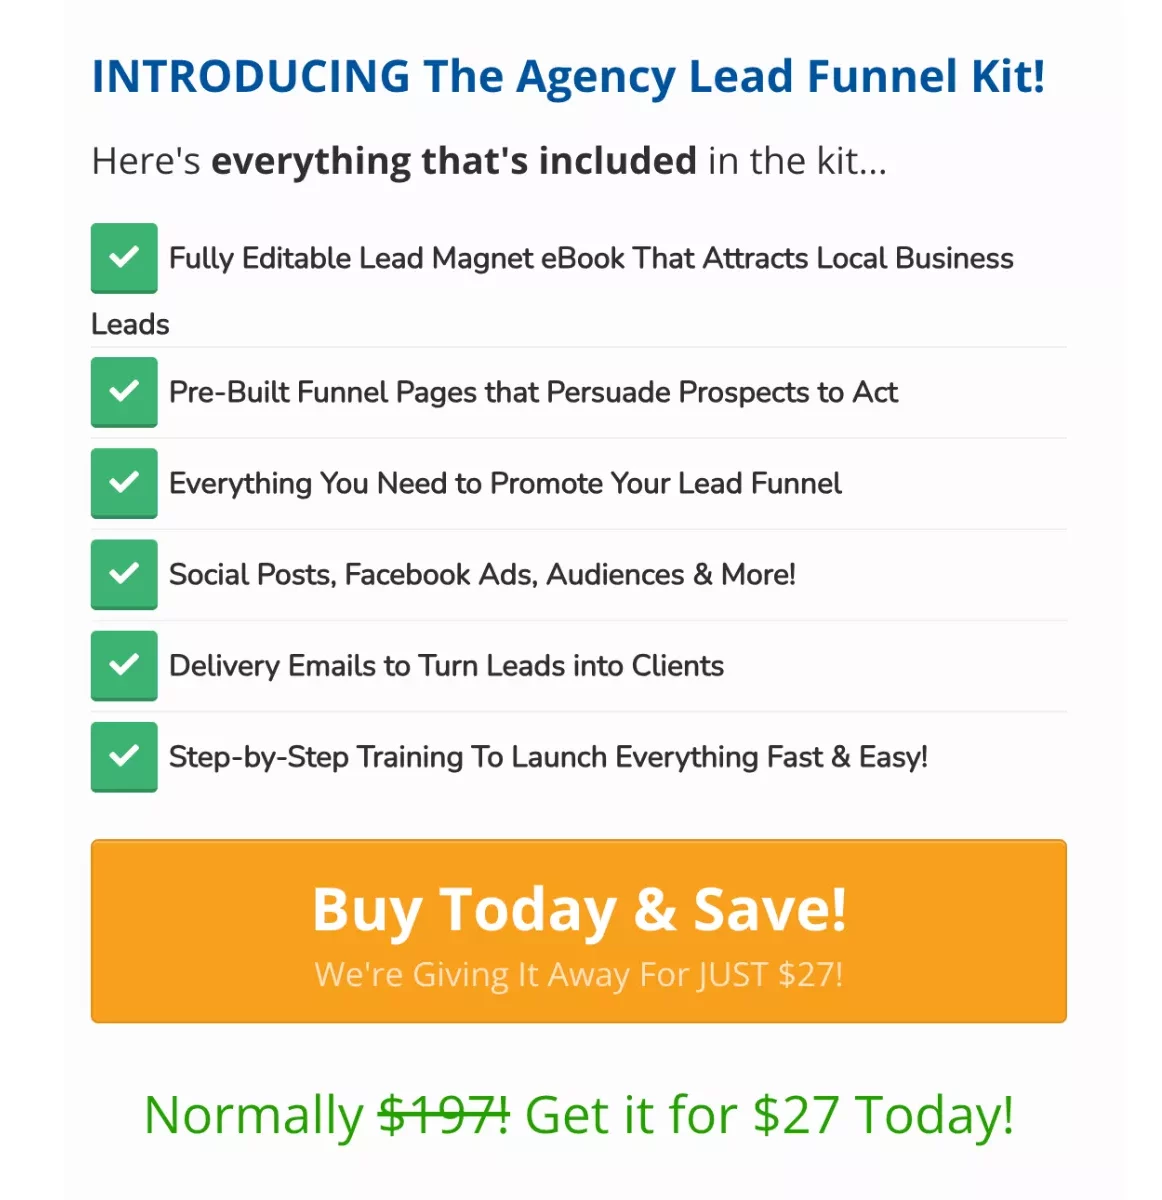 The Agency Lead Funnel Kit cost